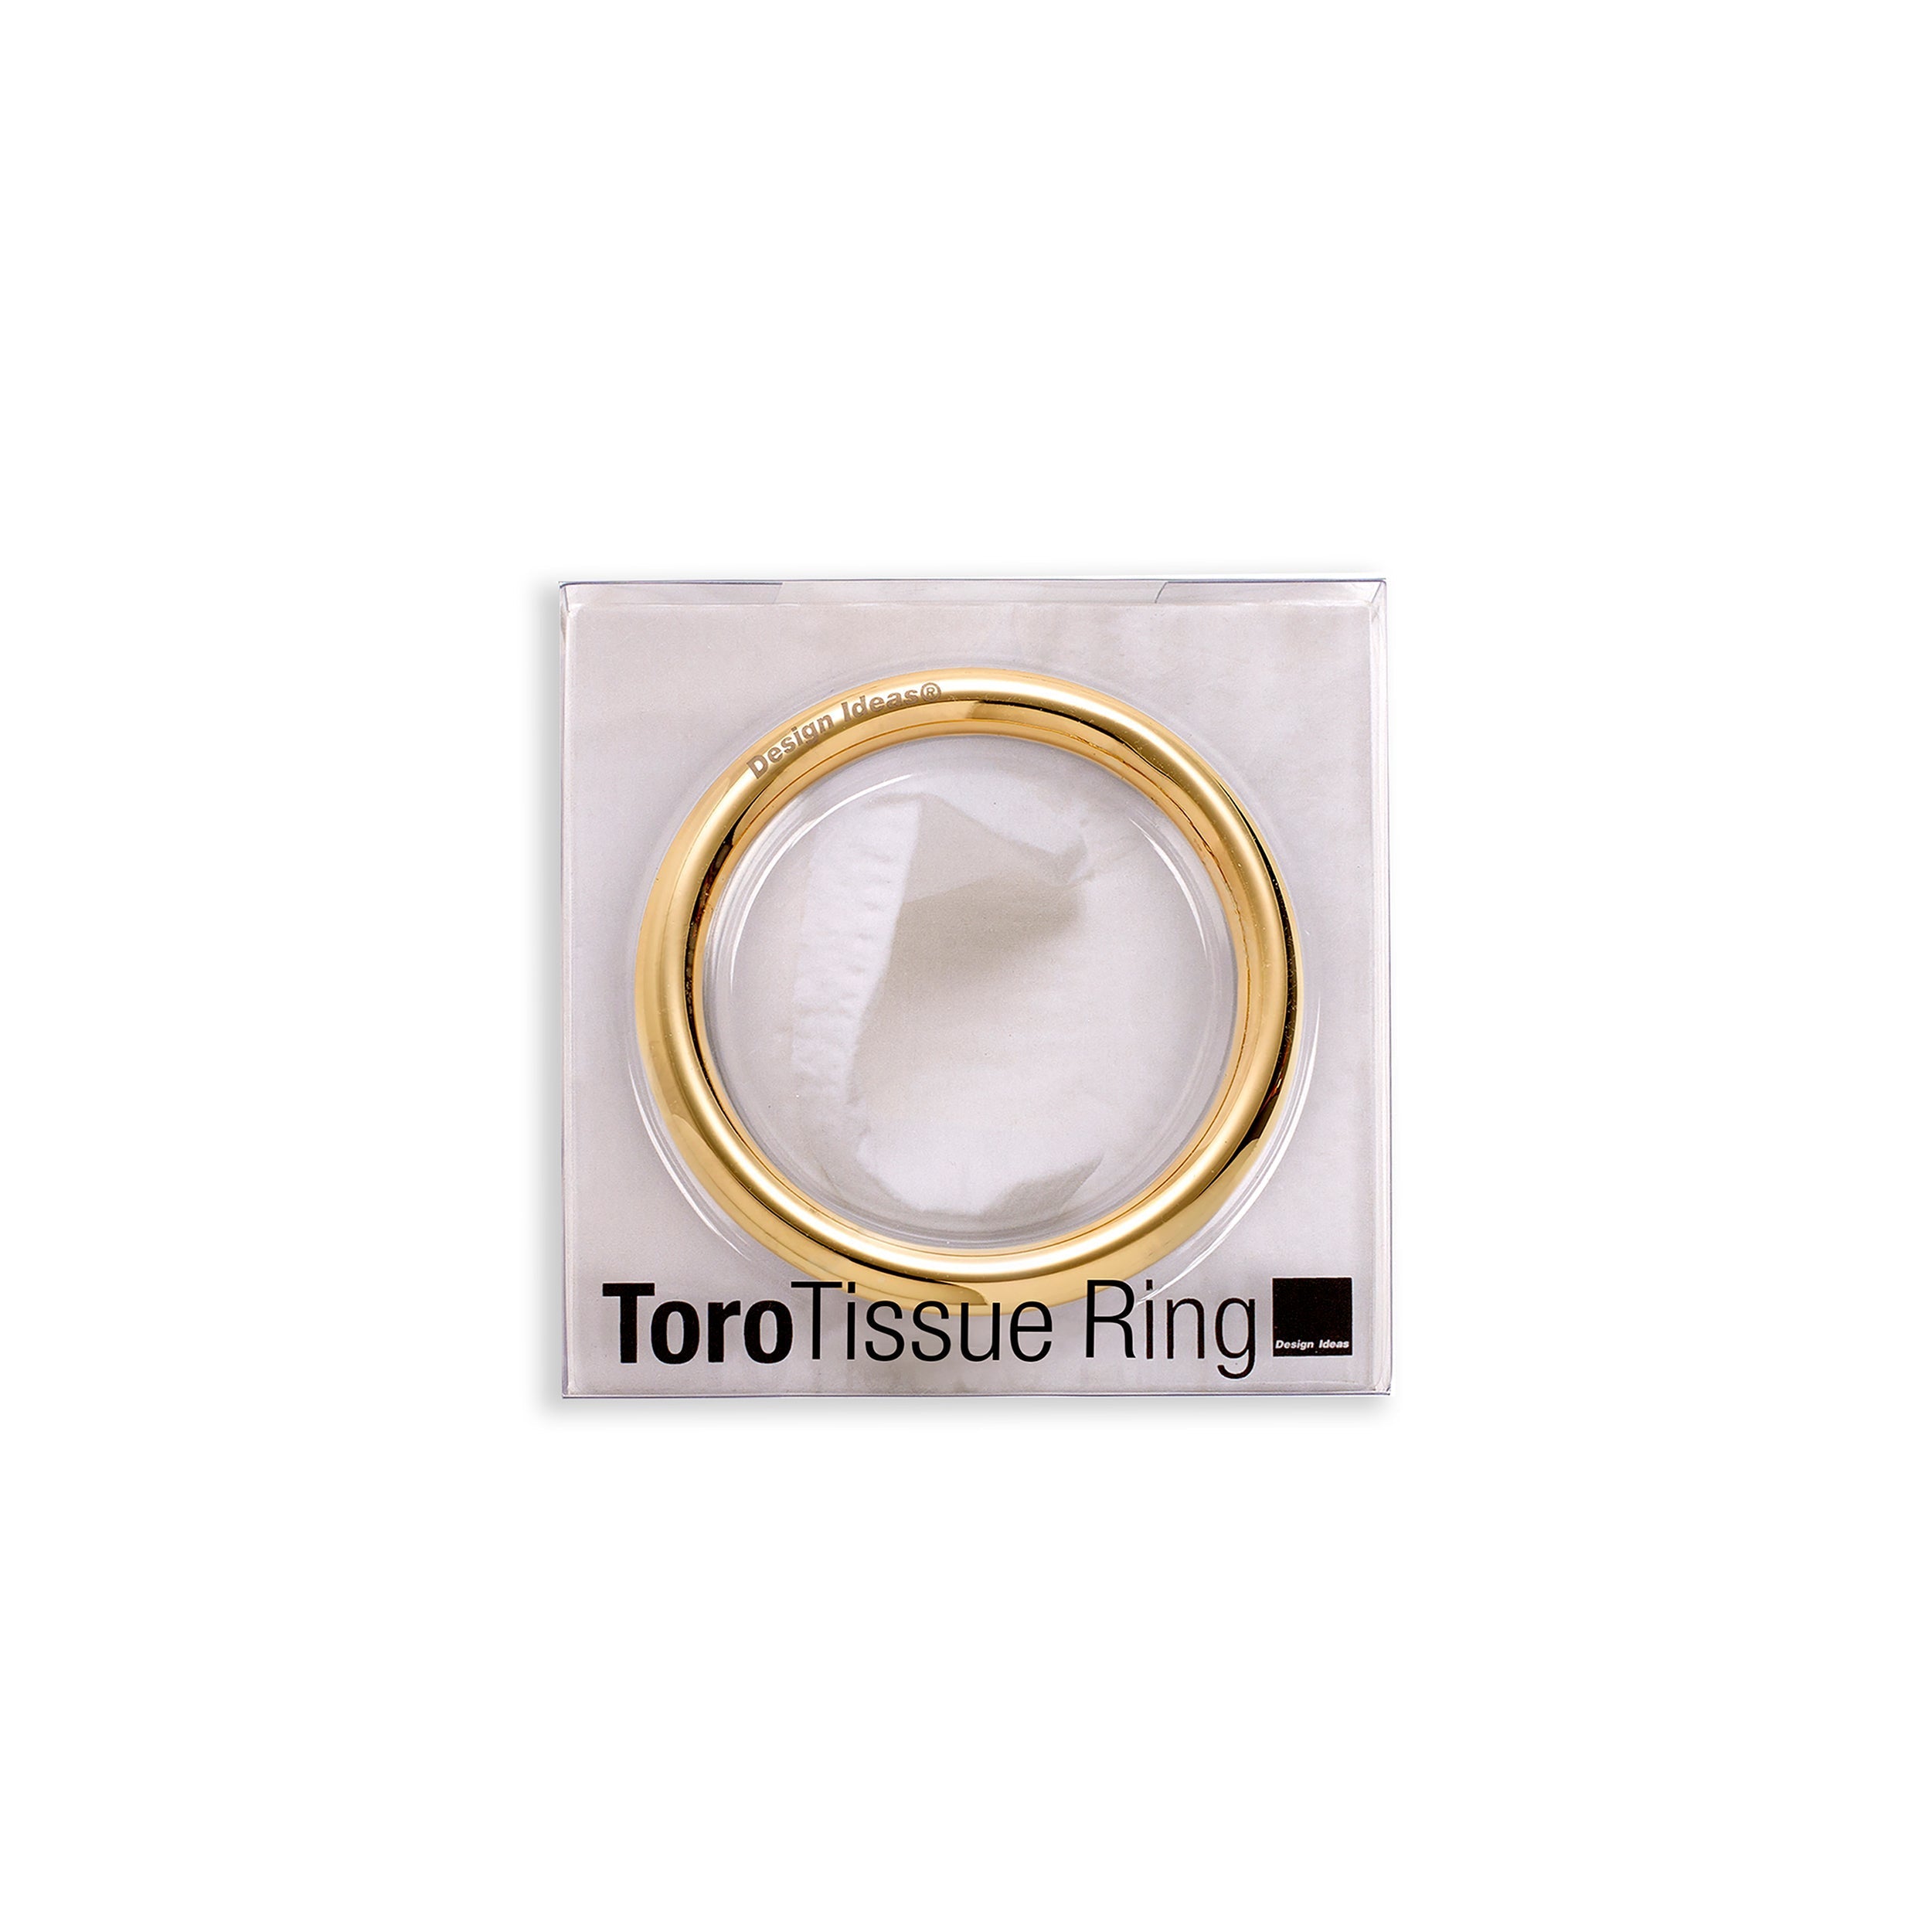 Toro Stainless Steel Ring Copper Color | Image 4 |  | Expertly constructed with natural stainless steel for long lasting use | texxture home